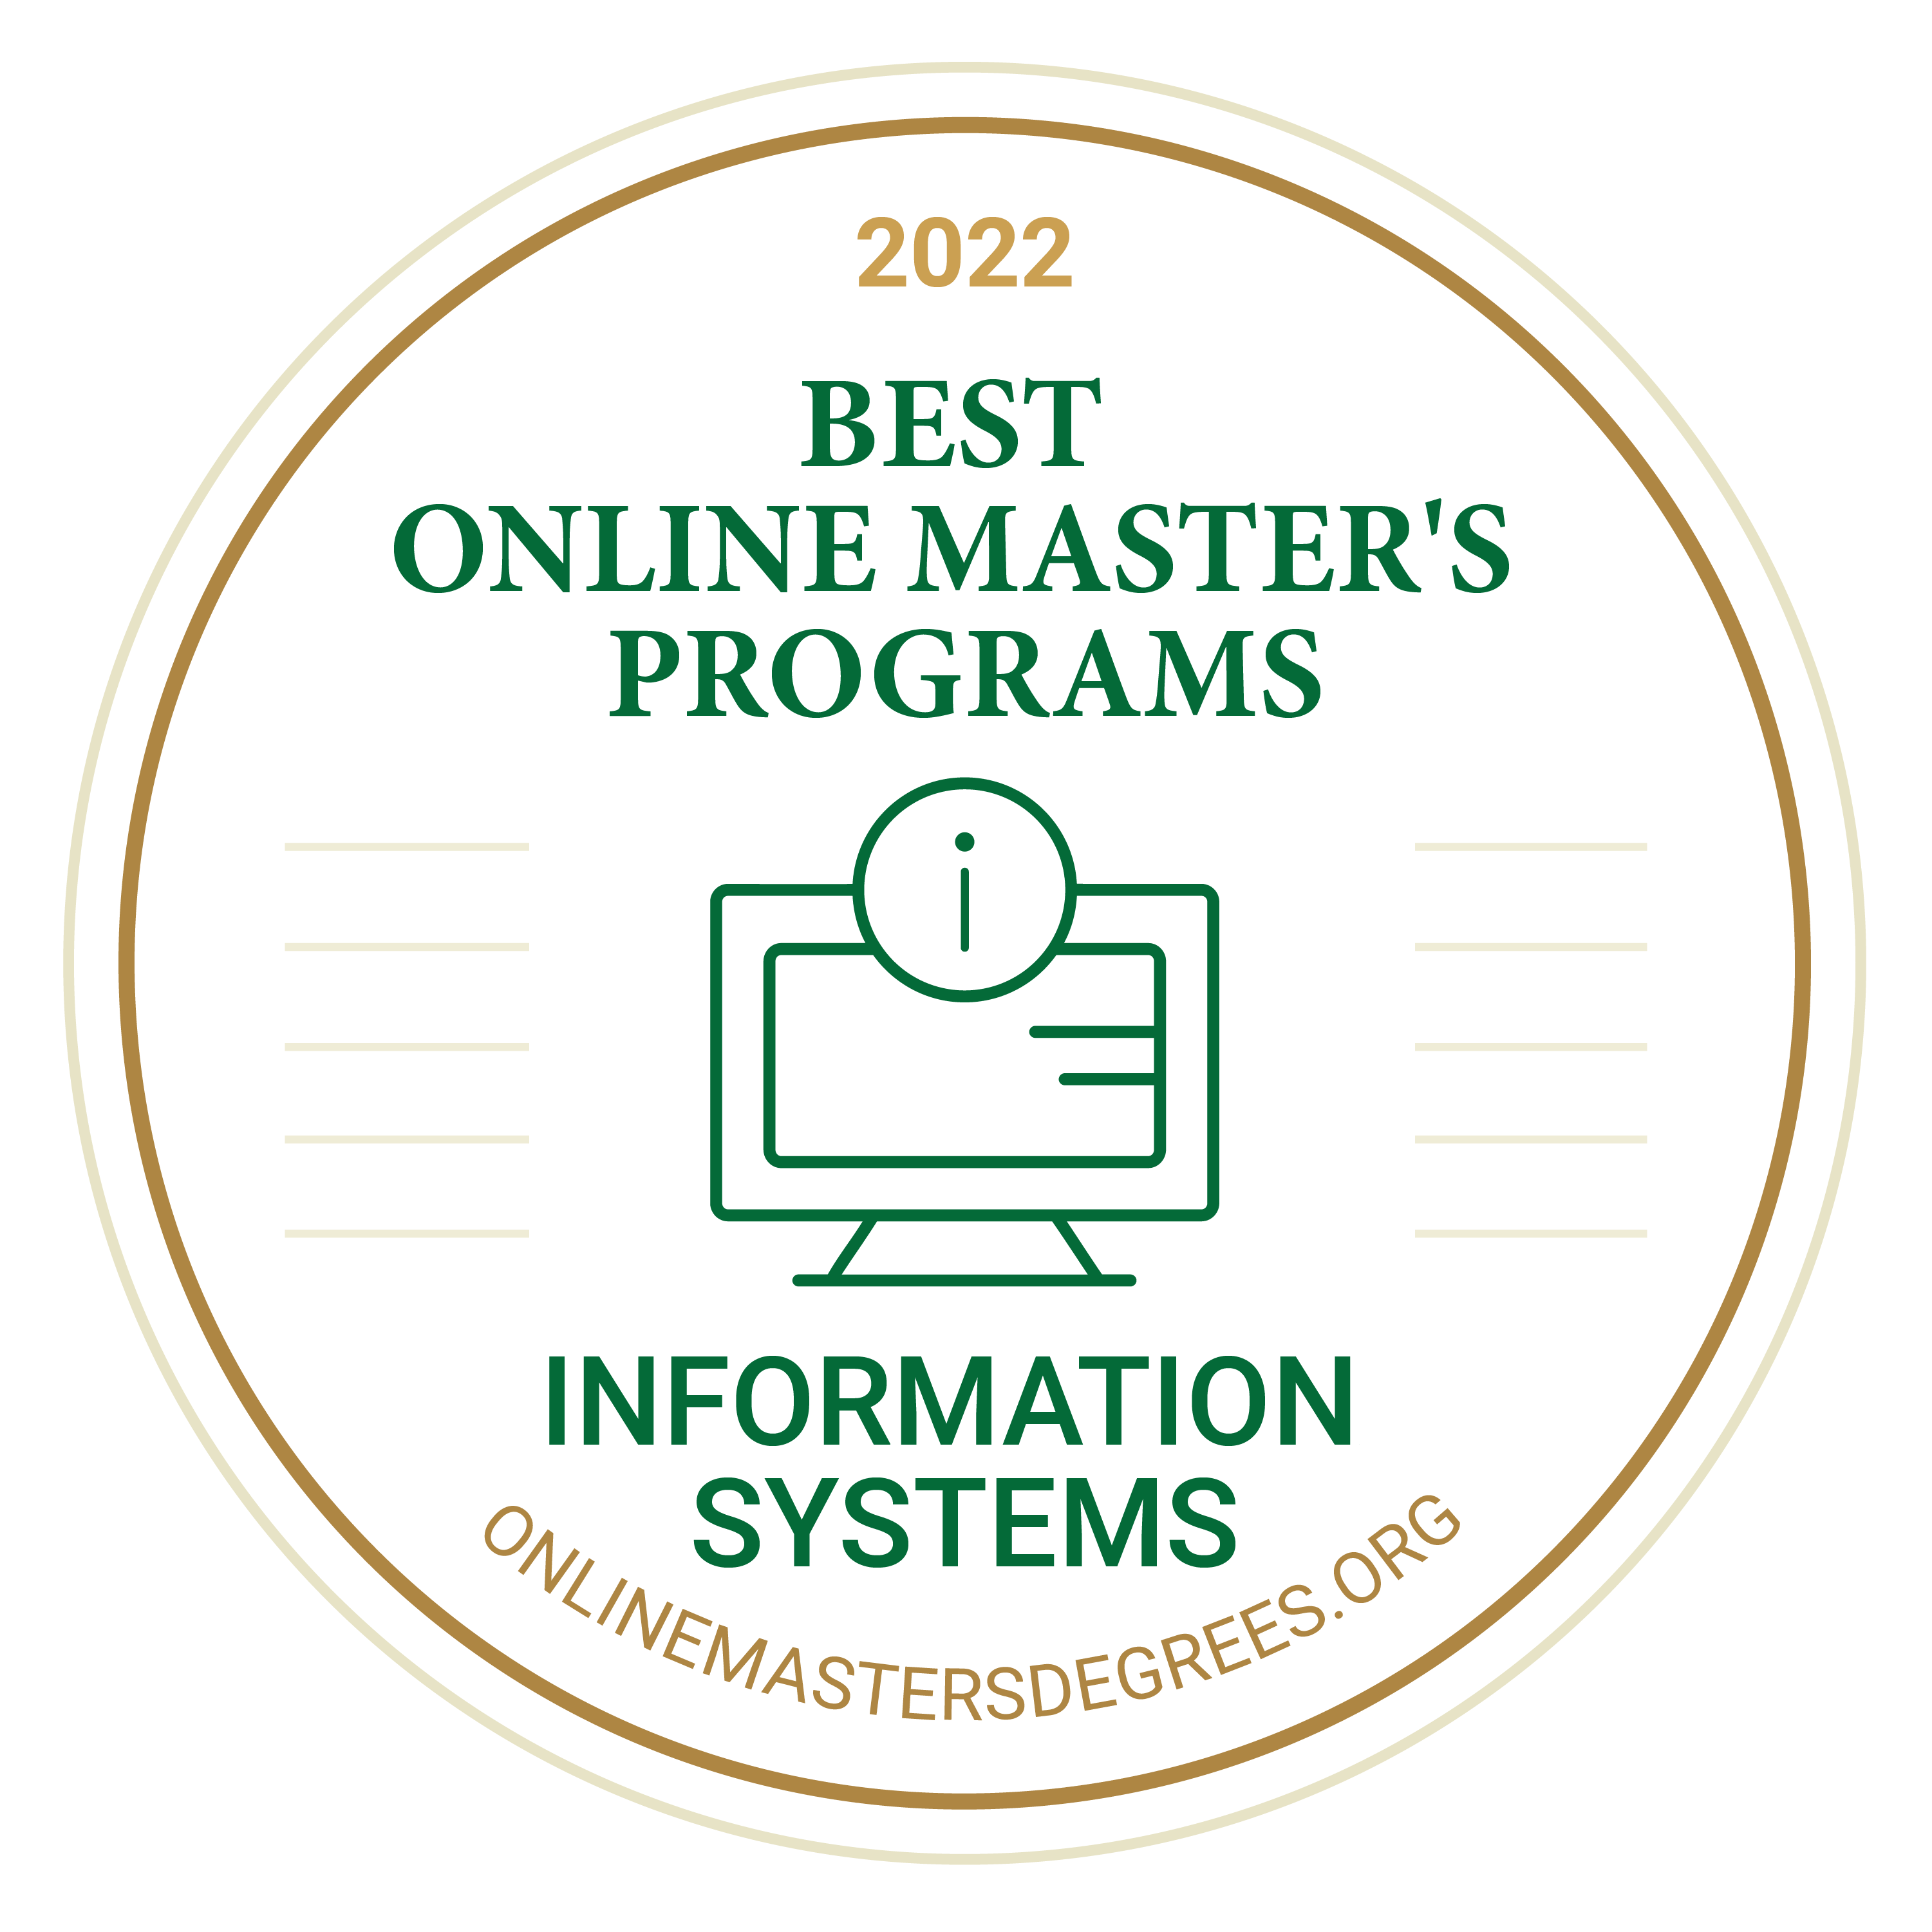 2022 online masters degrees Best Online Masters Programs Information Systems